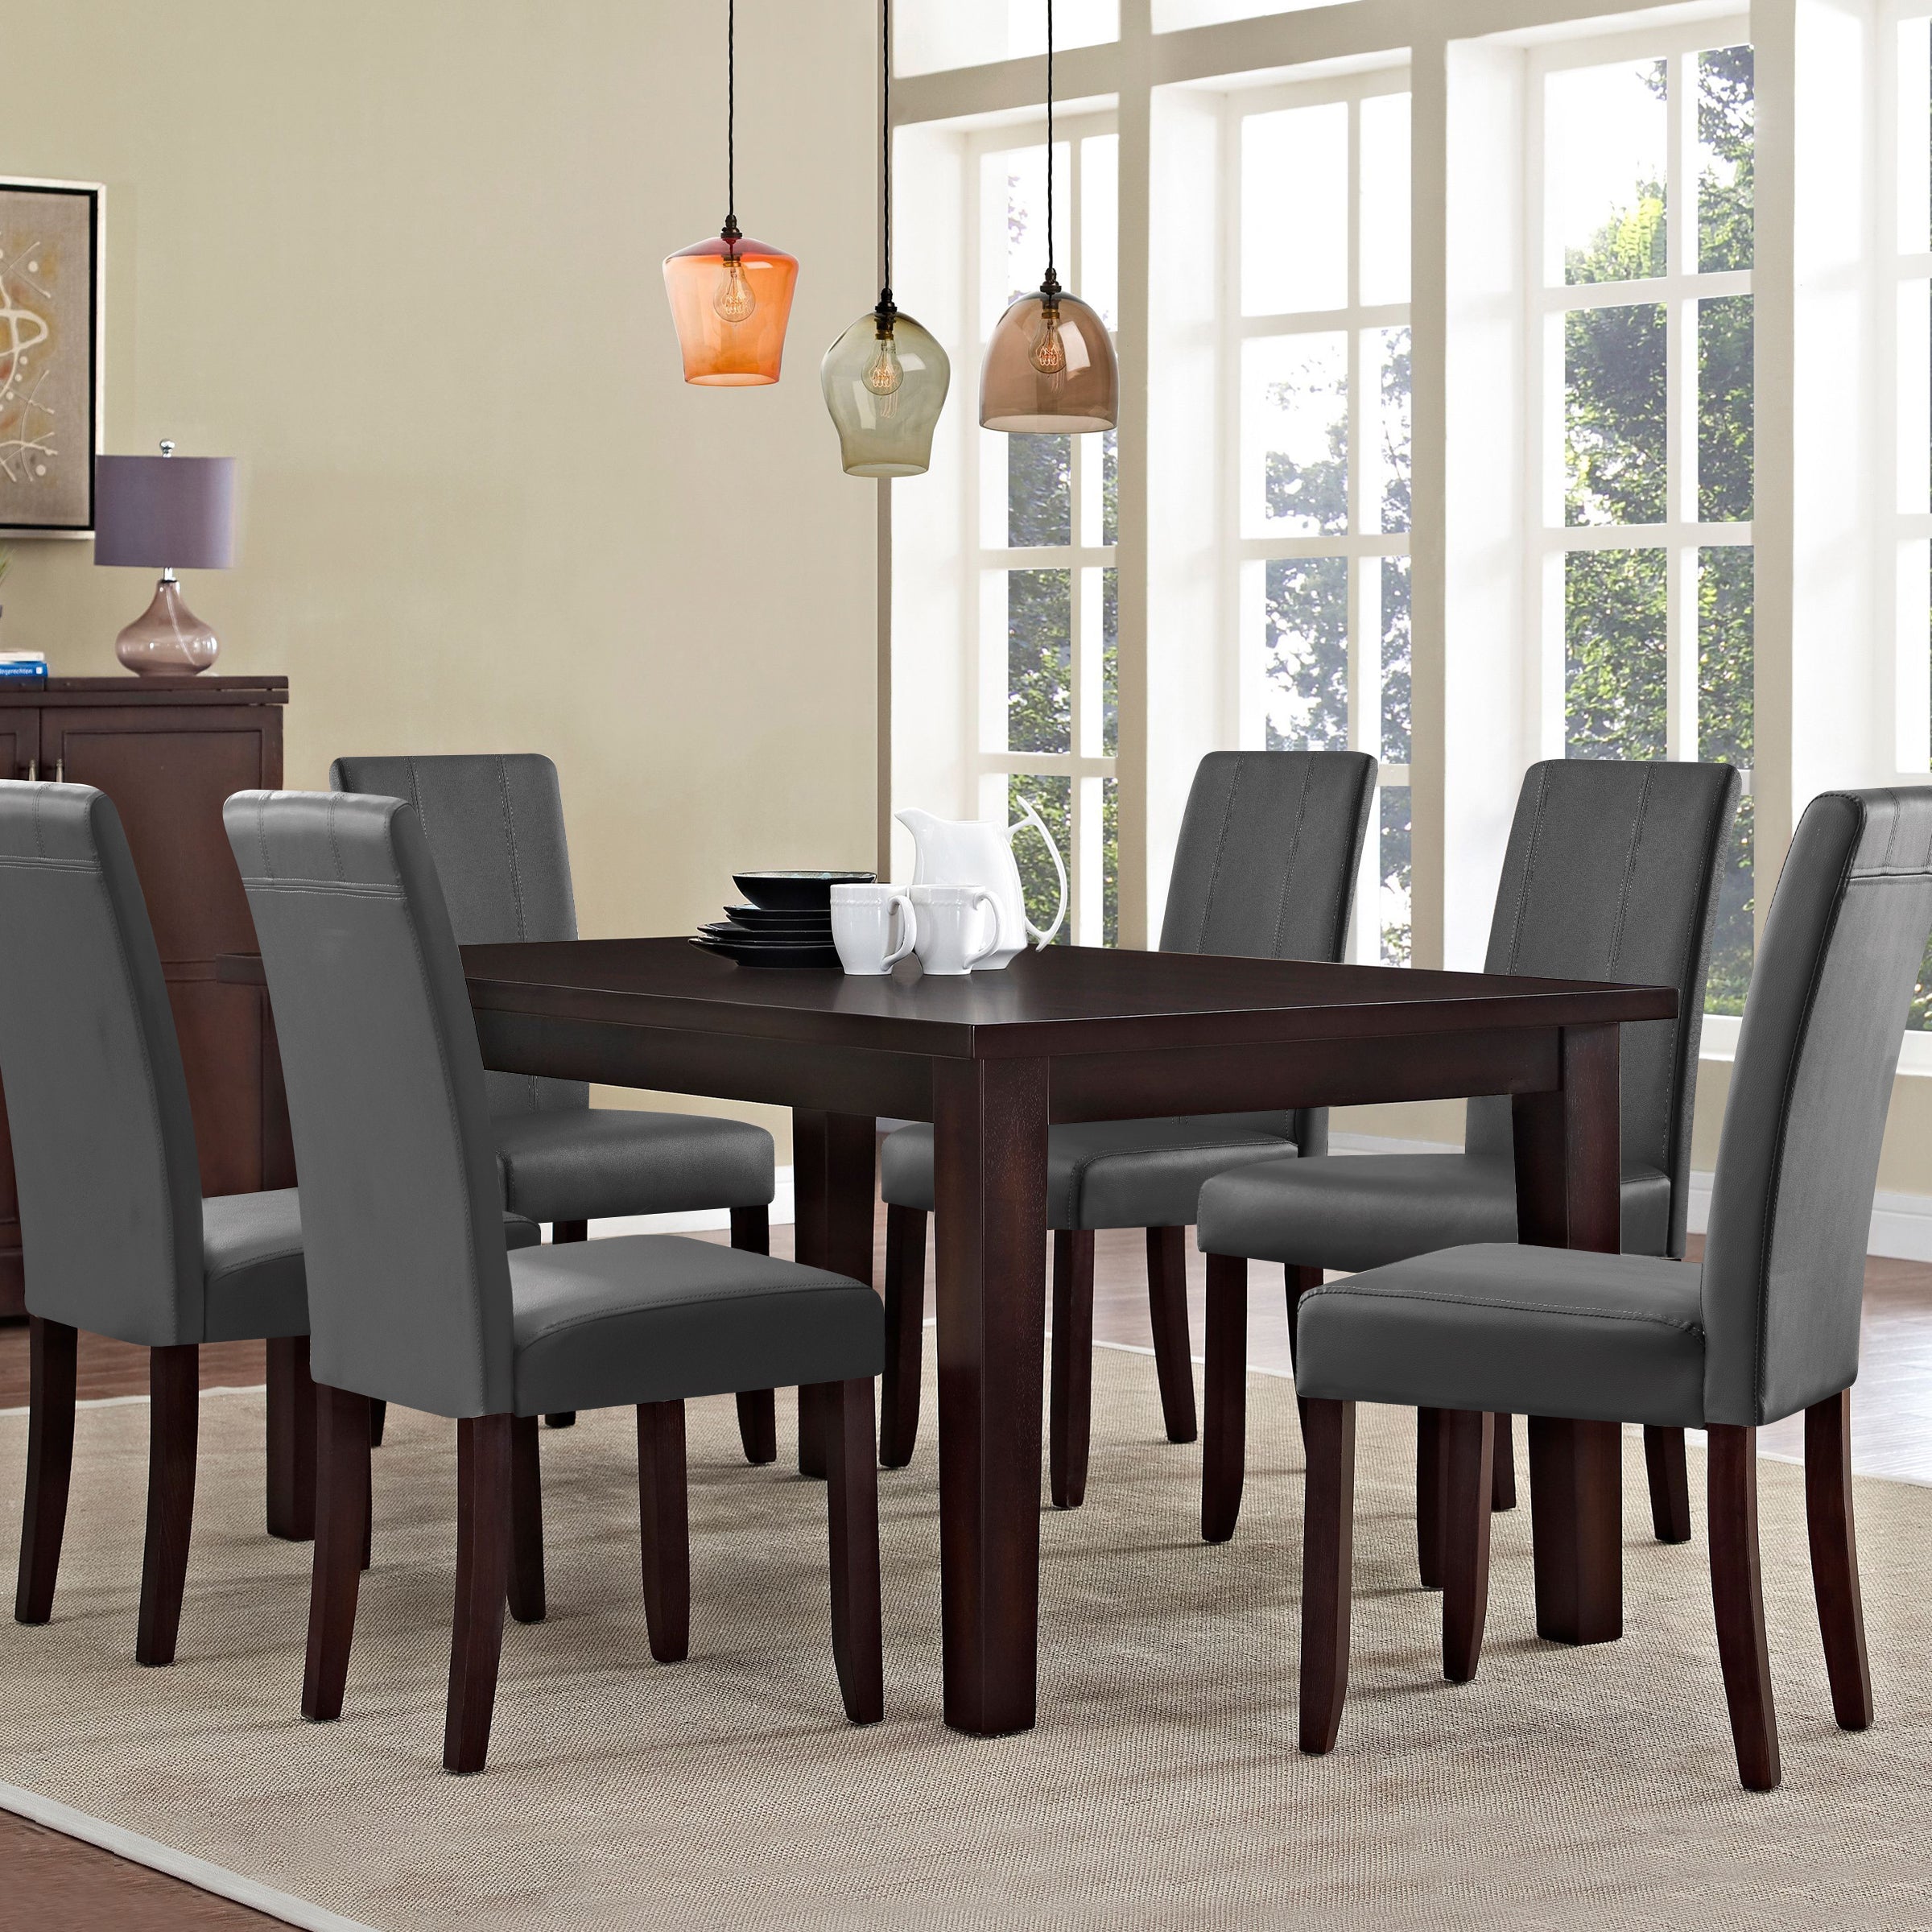 Modern Upholstered PU Leather Dining Chairs